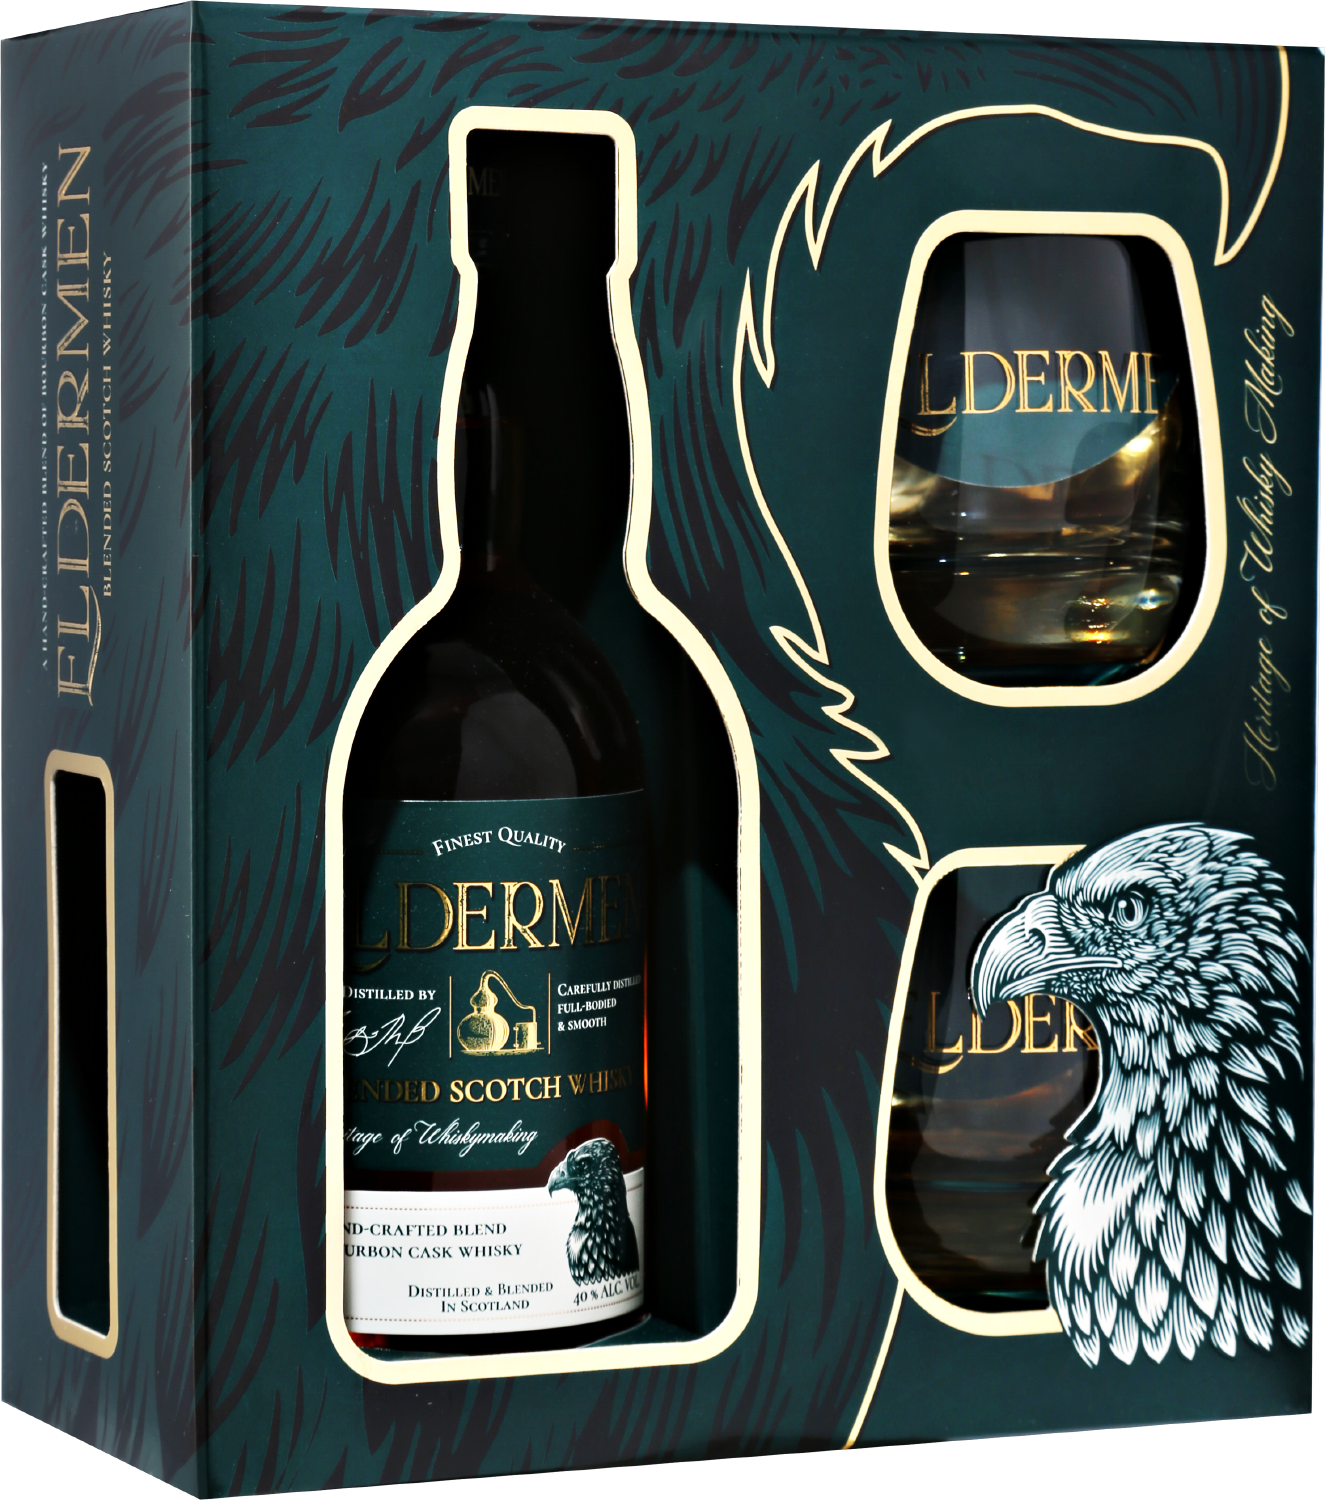 Eldermen Blended Scotch Whisky (gift box with 2 glasses) clan macgregor blended scotch whisky gift box with a glass